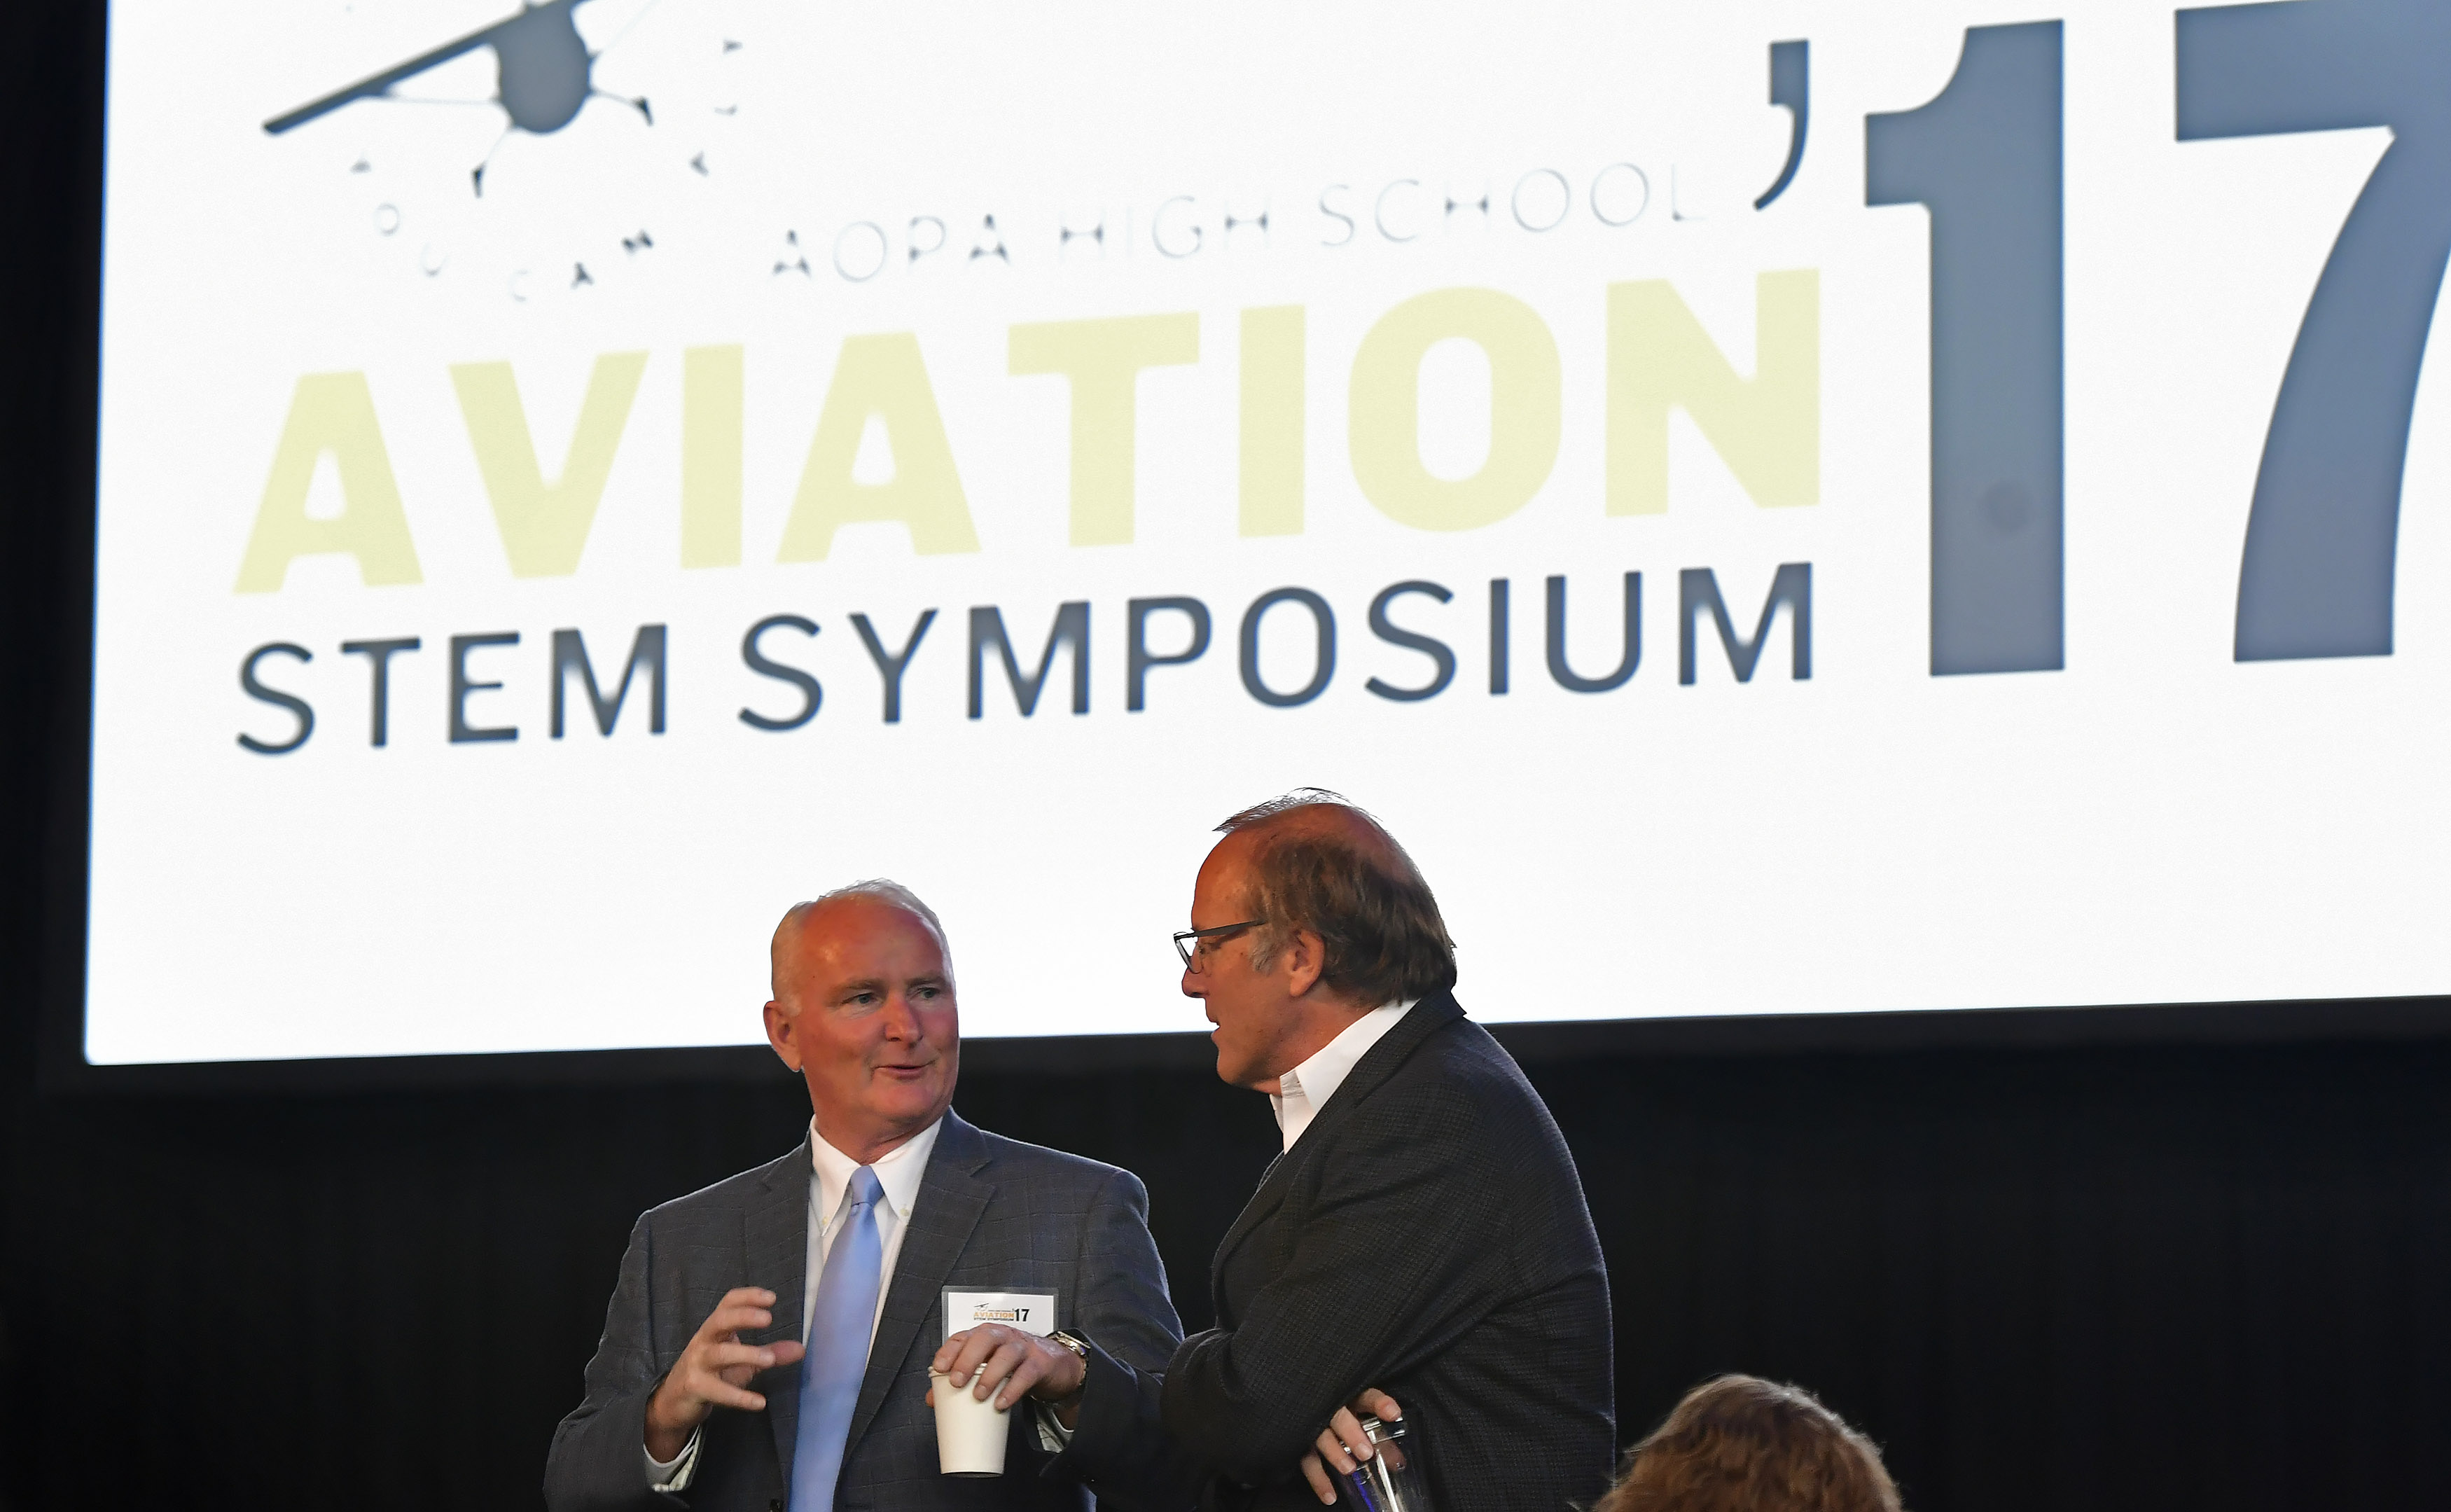 AOPA President and CEO Mark Baker chats with retired Alaska Air Group Chairman and CEO Bill Ayer during the AOPA High School Aviation STEM Symposium at American Airlines C.R. Smith Museum in Forth Worth, Texas, Nov. 6. Photo by David Tulis.